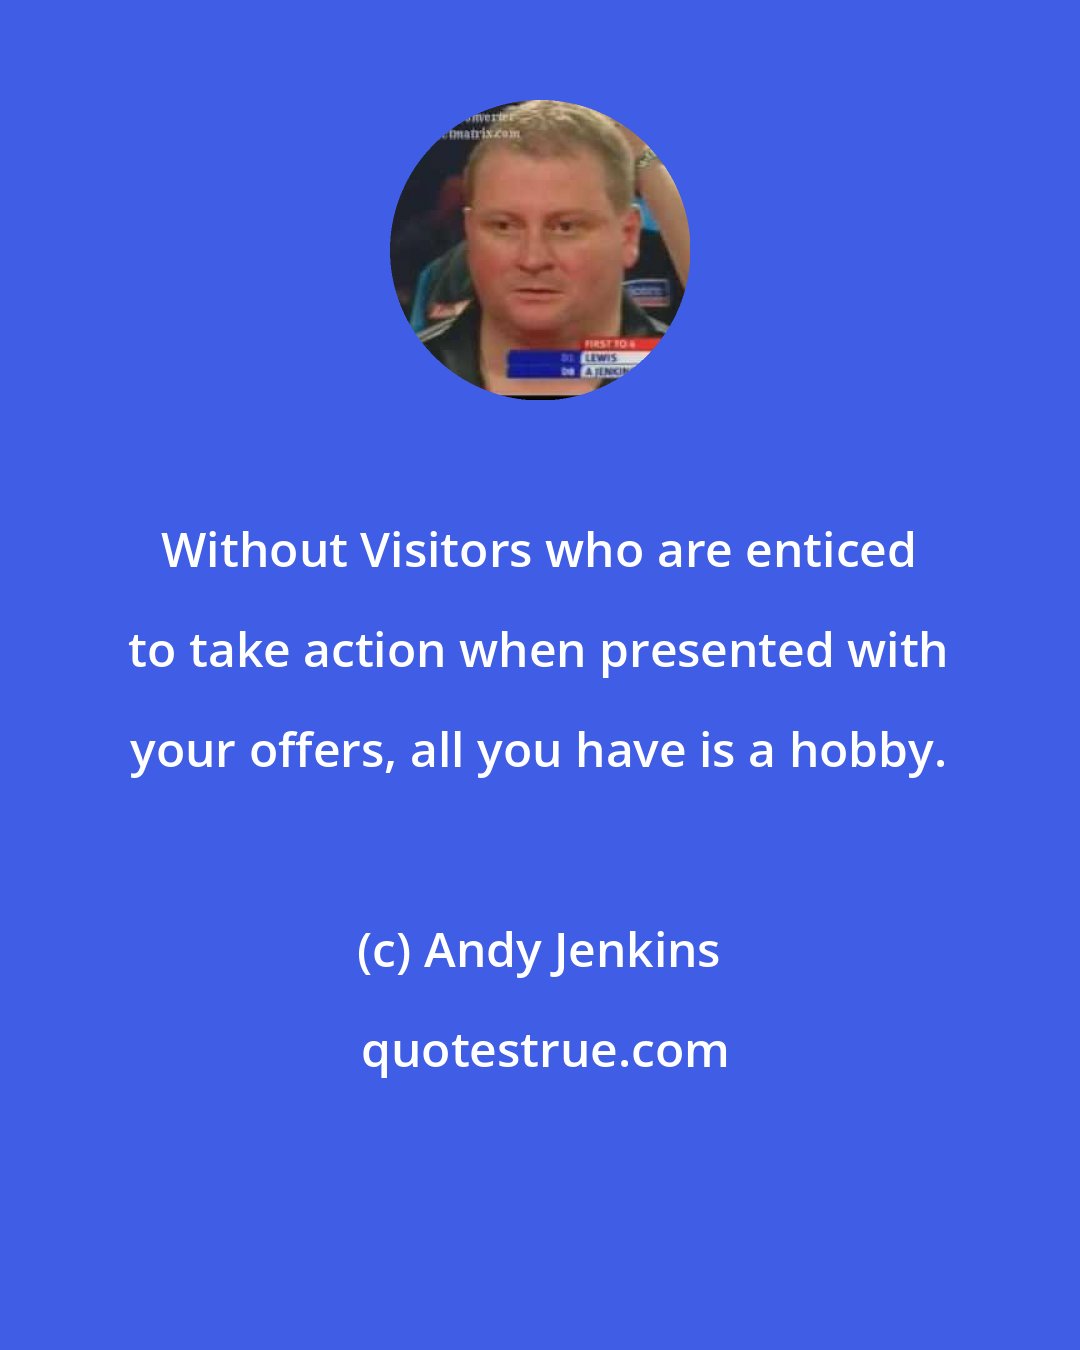 Andy Jenkins: Without Visitors who are enticed to take action when presented with your offers, all you have is a hobby.